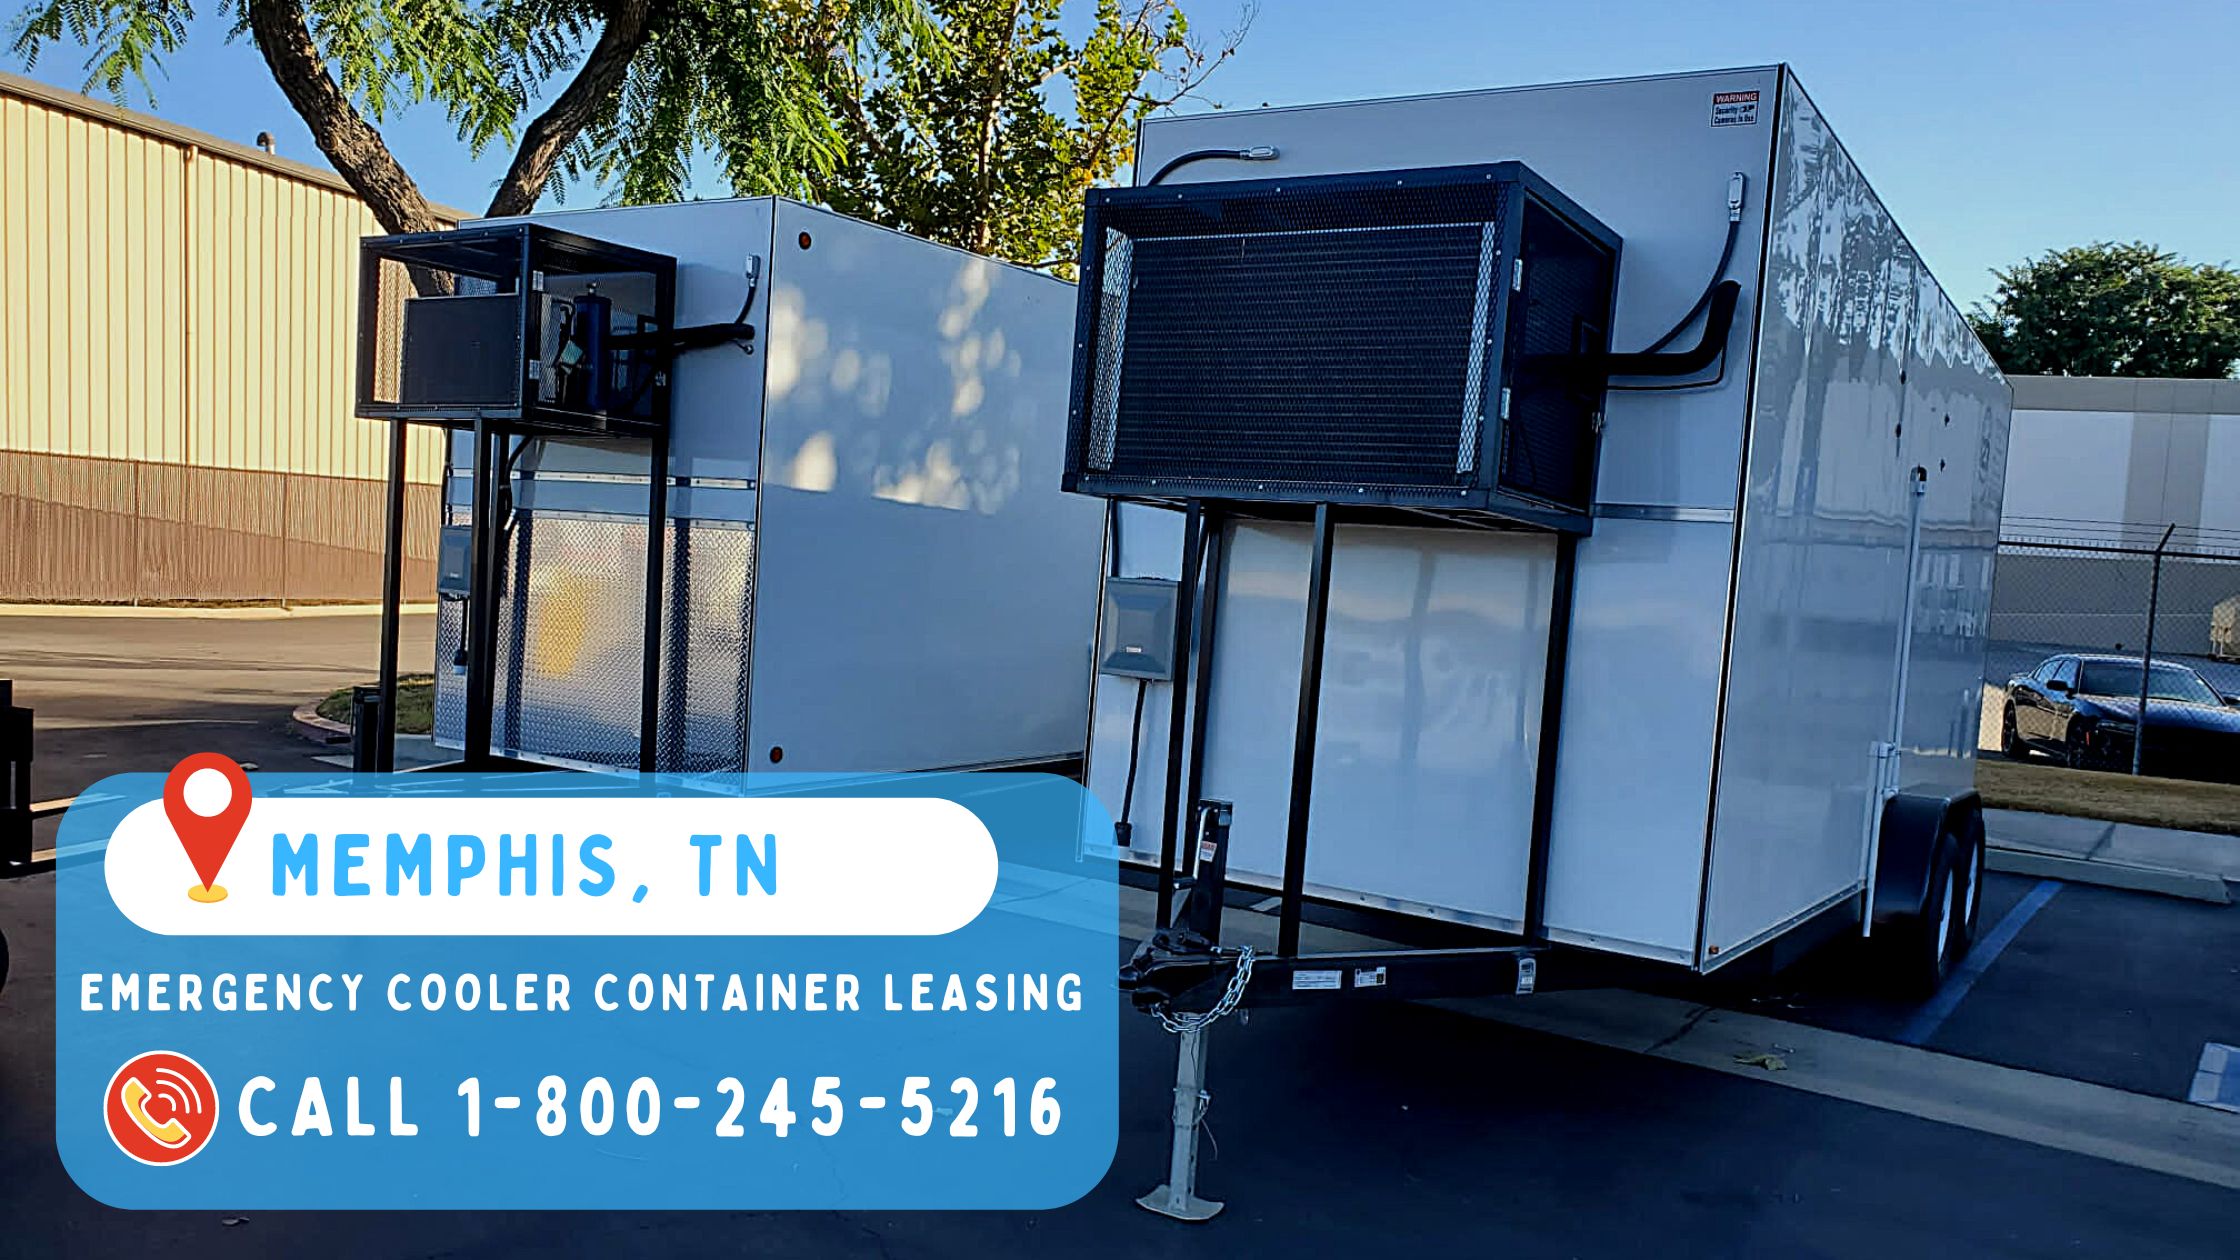 Emergency Cooler Container Leasing in Memphis